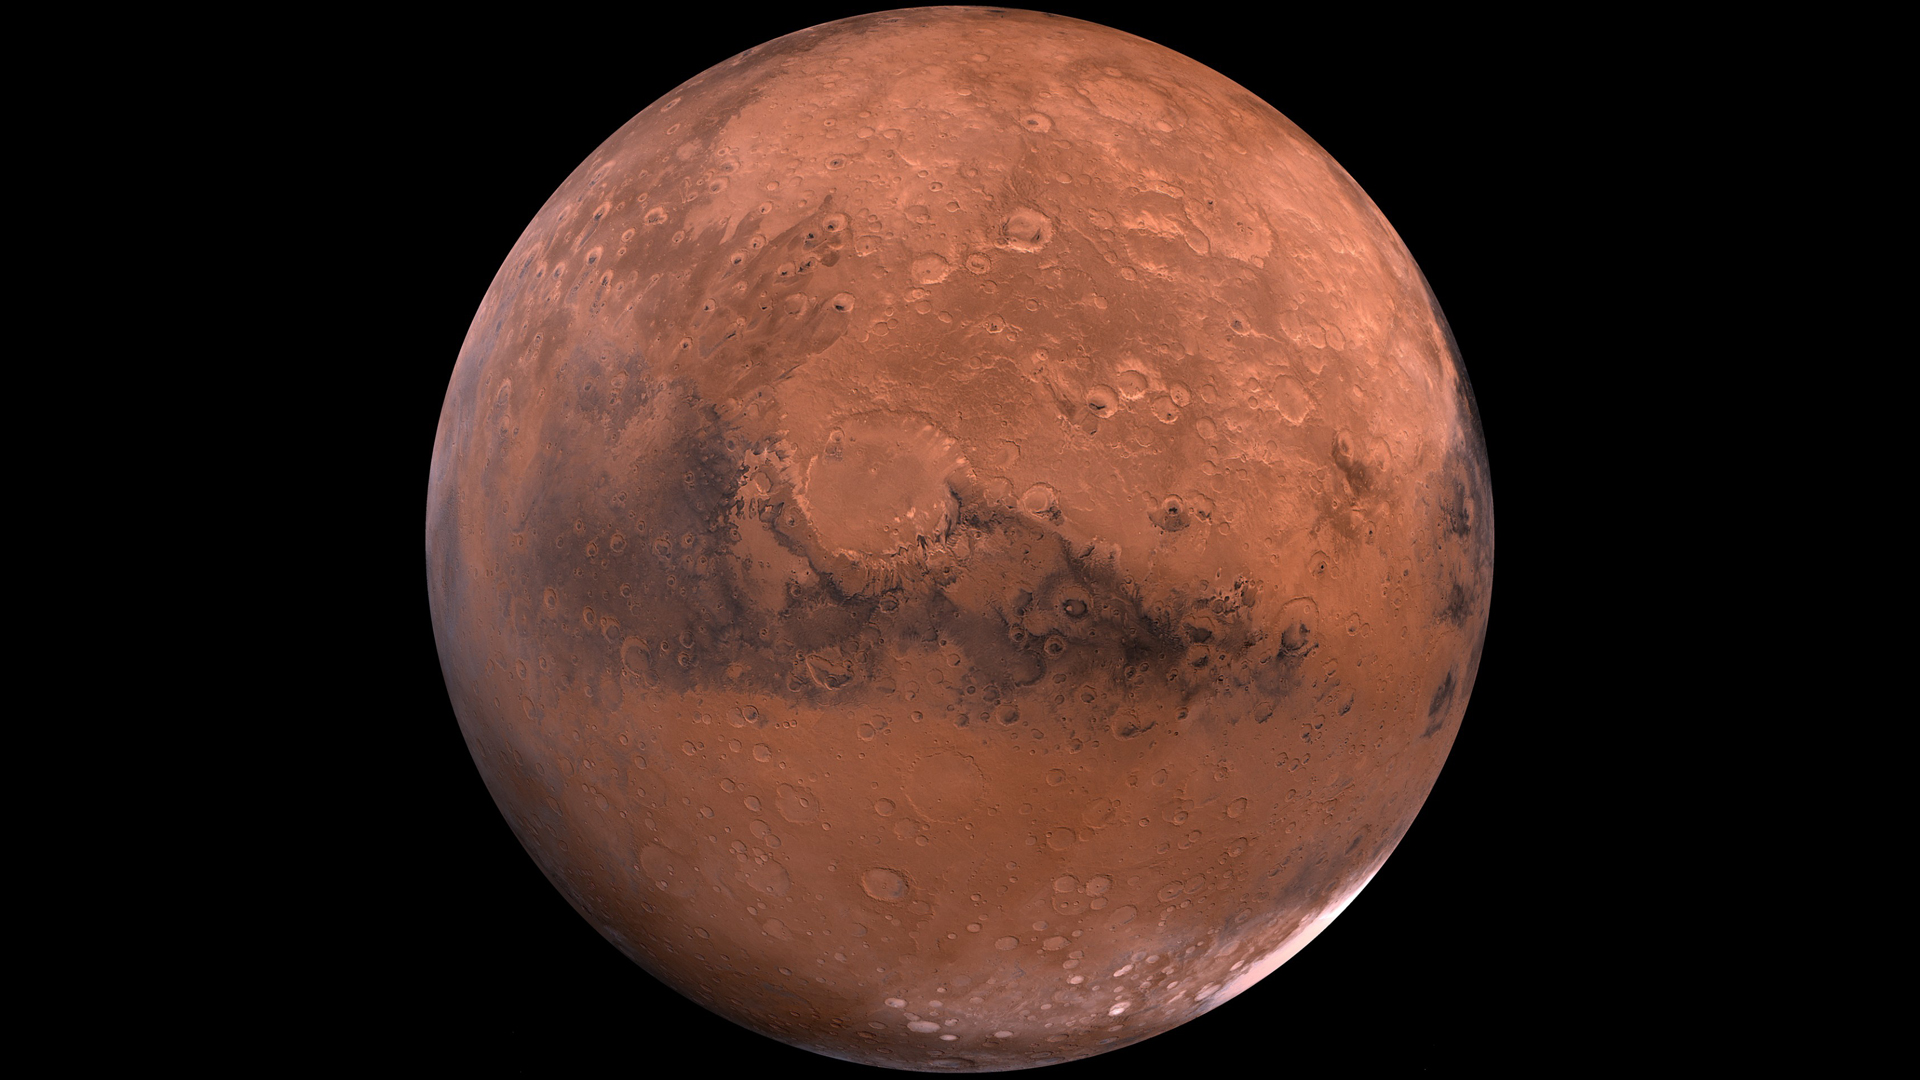 Mars continues to surprise us.